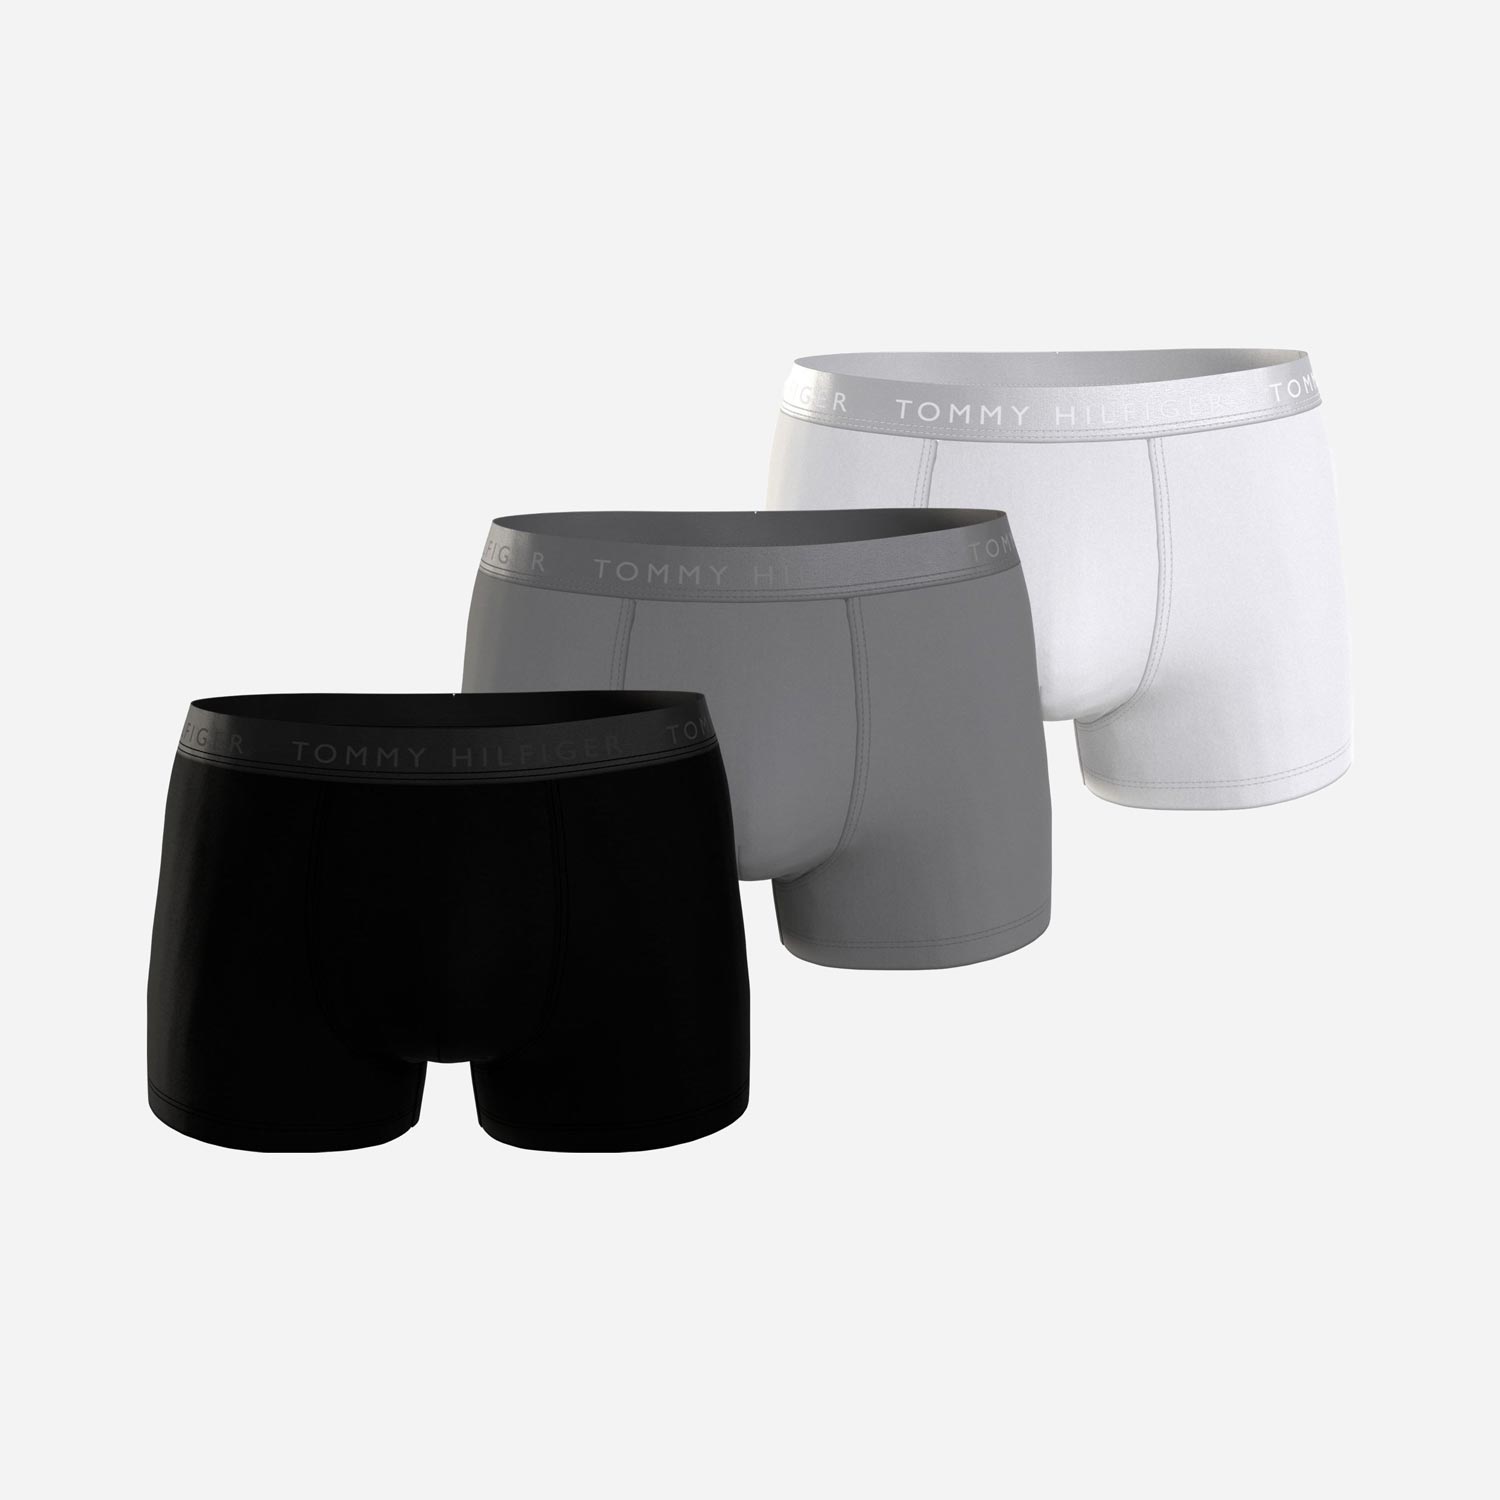 Tommy Hifiger 3 Pack Trunk - Black/Zinc Alloy/White